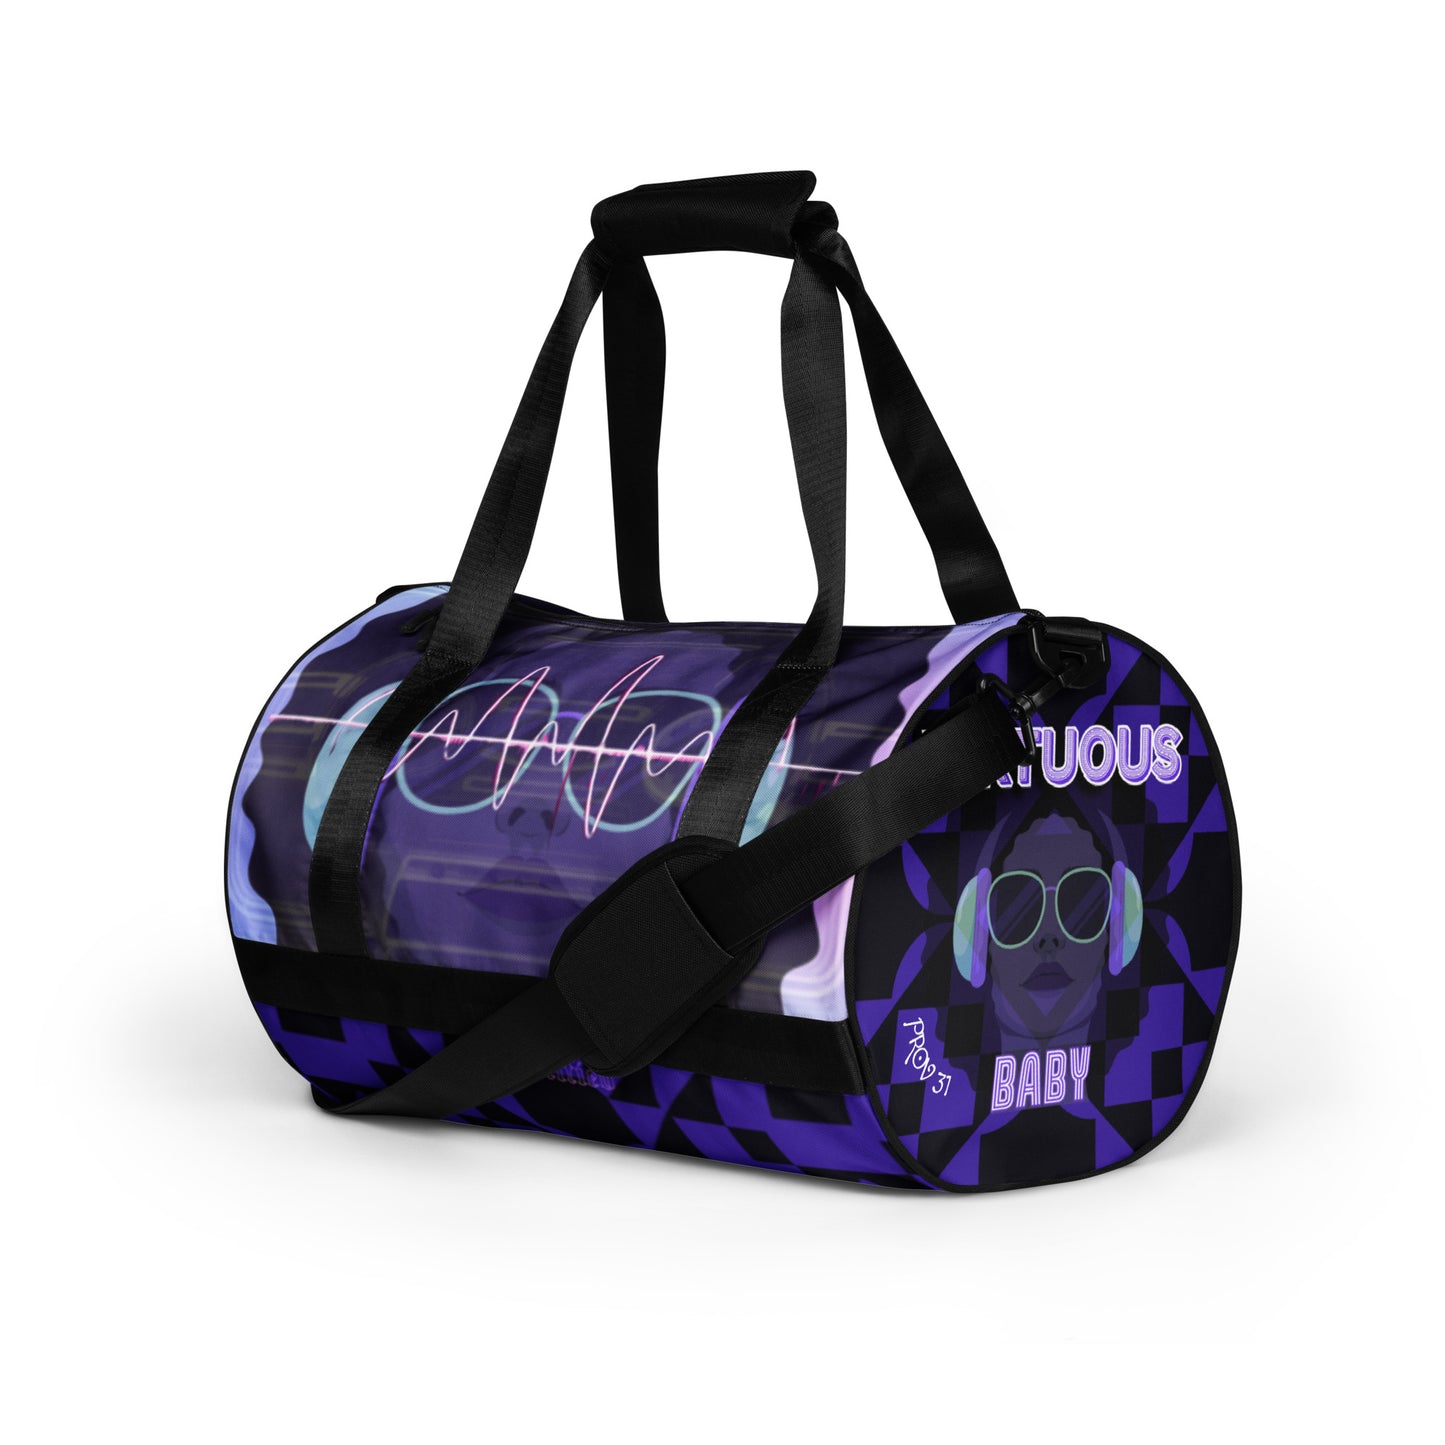 Virtuous Baby- All-over print gym bag